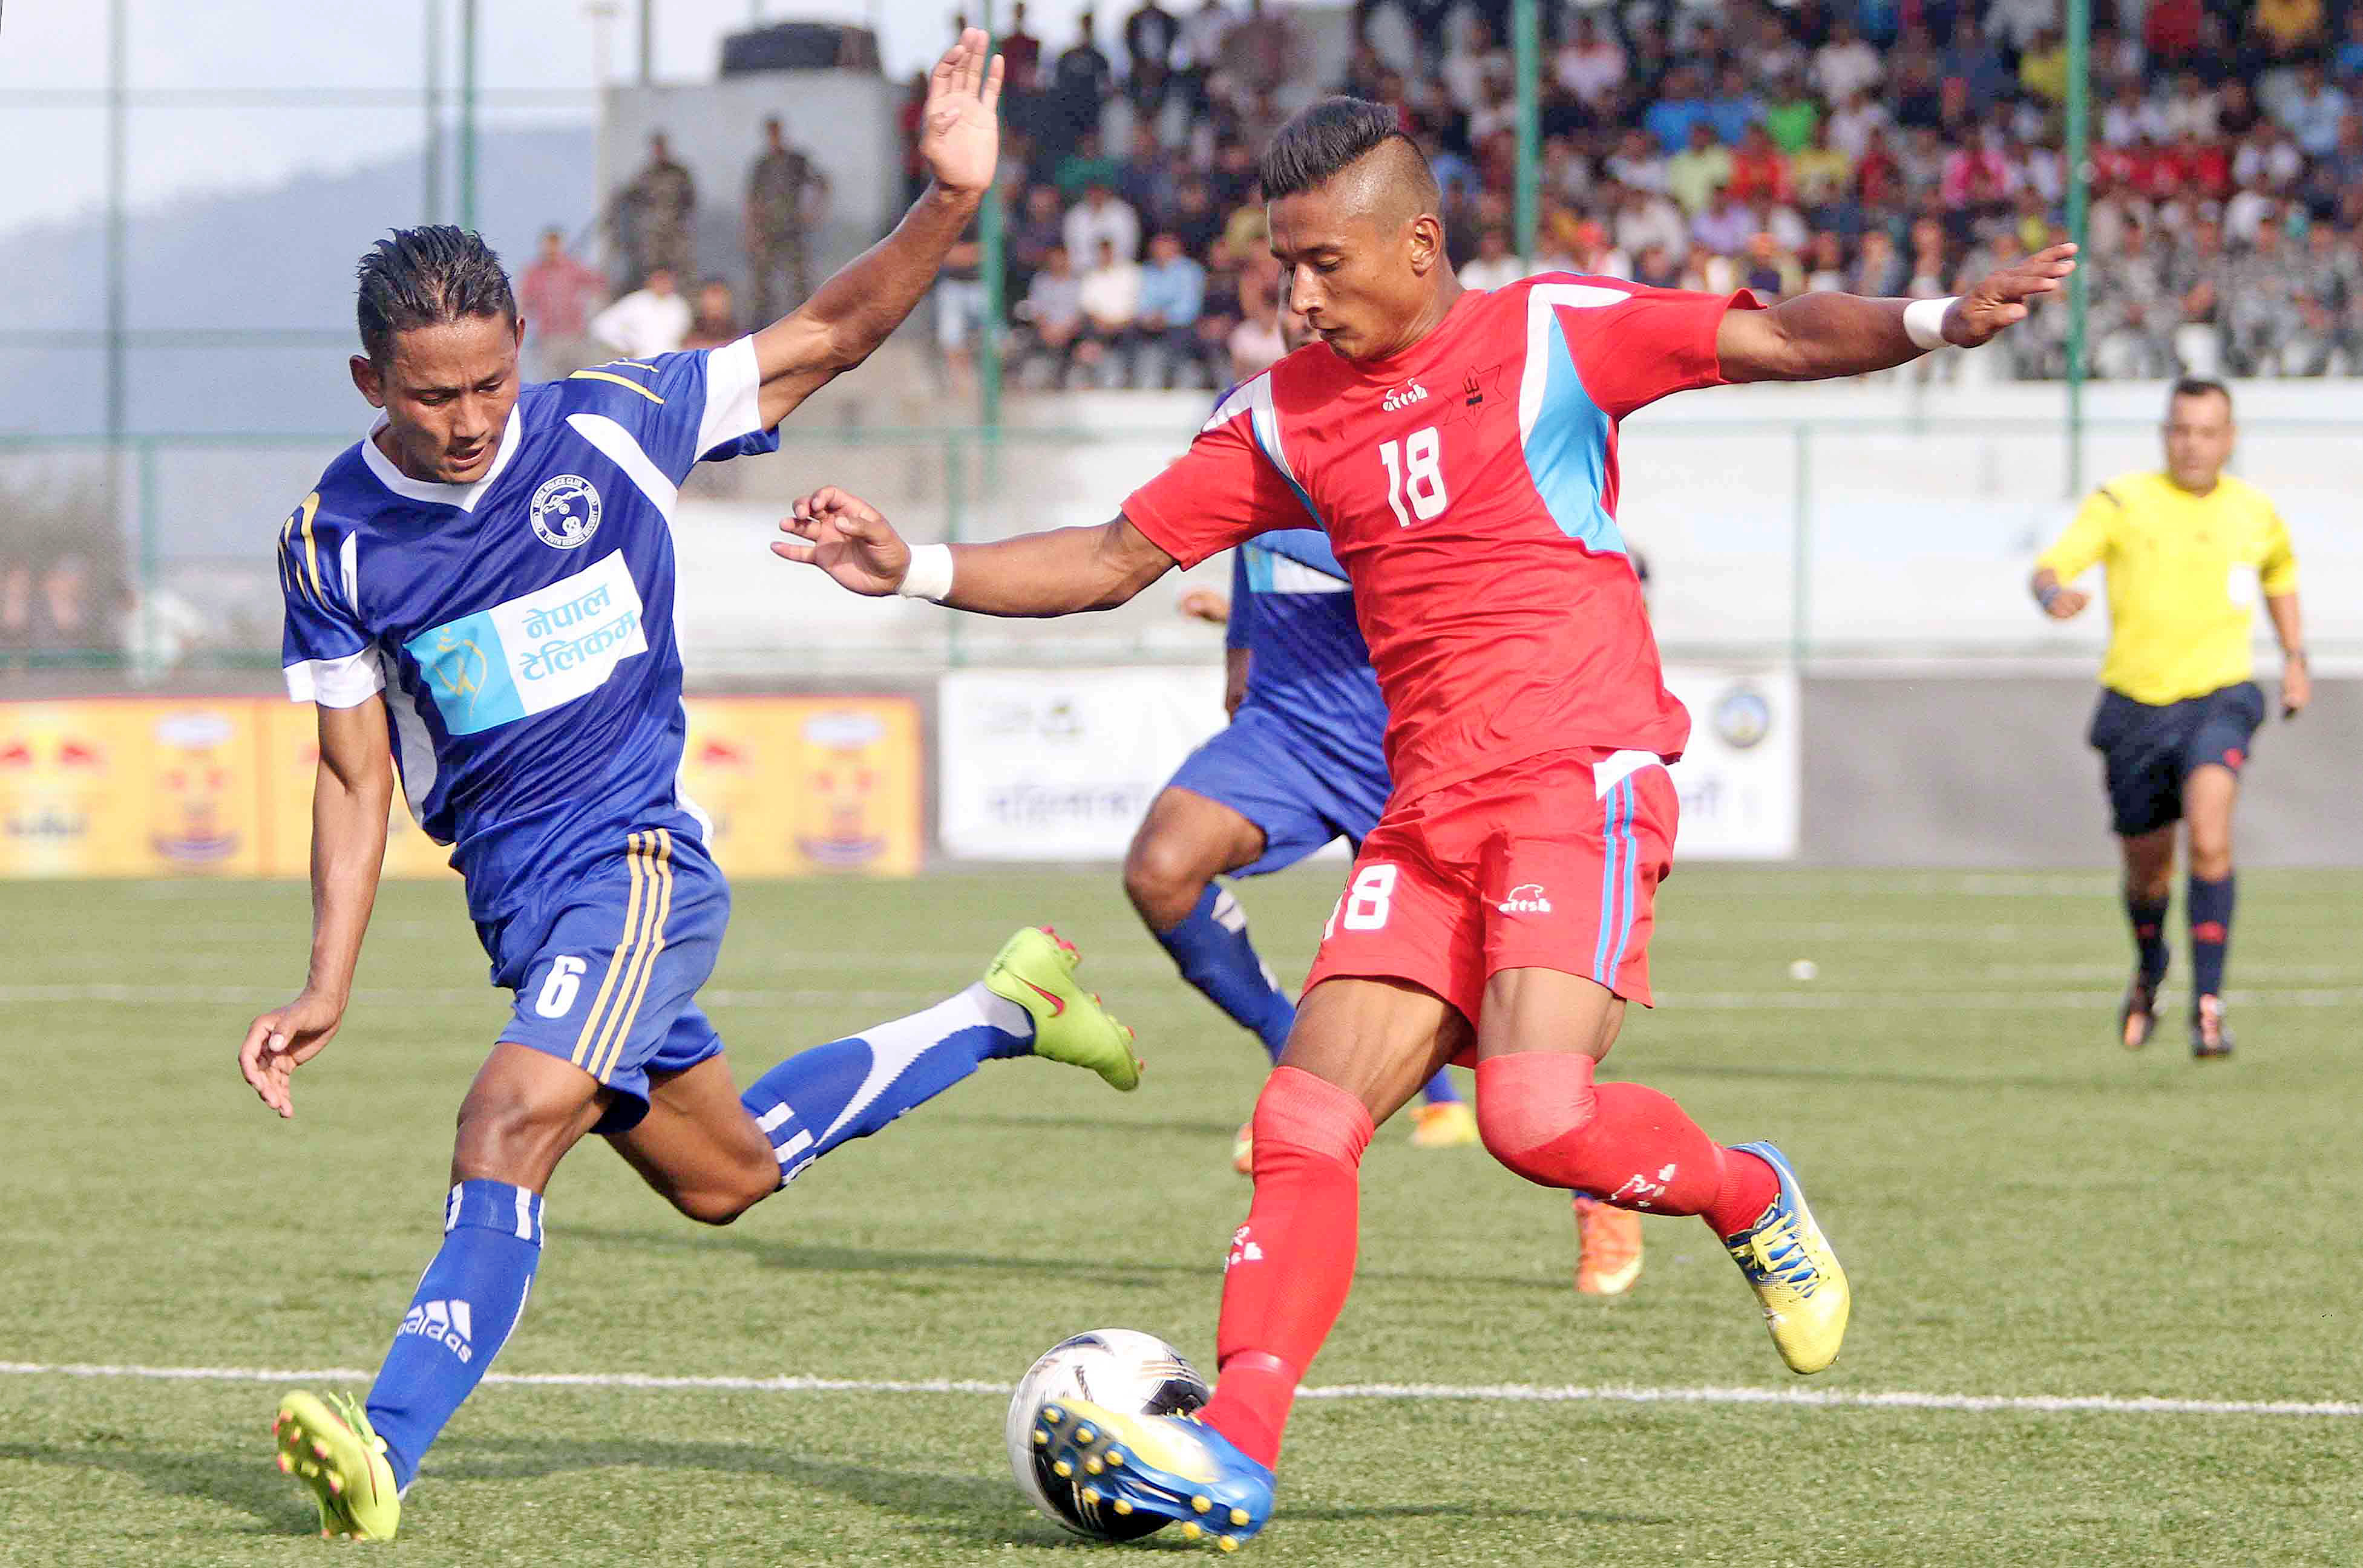 Nabayug Shrestha (right) of Tribhuvan Army Club vies for the ball against Bikram Dhimal of Nepal Police Club during their Red Bull National League match at ANFA Complex in Lalitpur on Thursday. (Credit Image: Udipt Singh Chhetry)